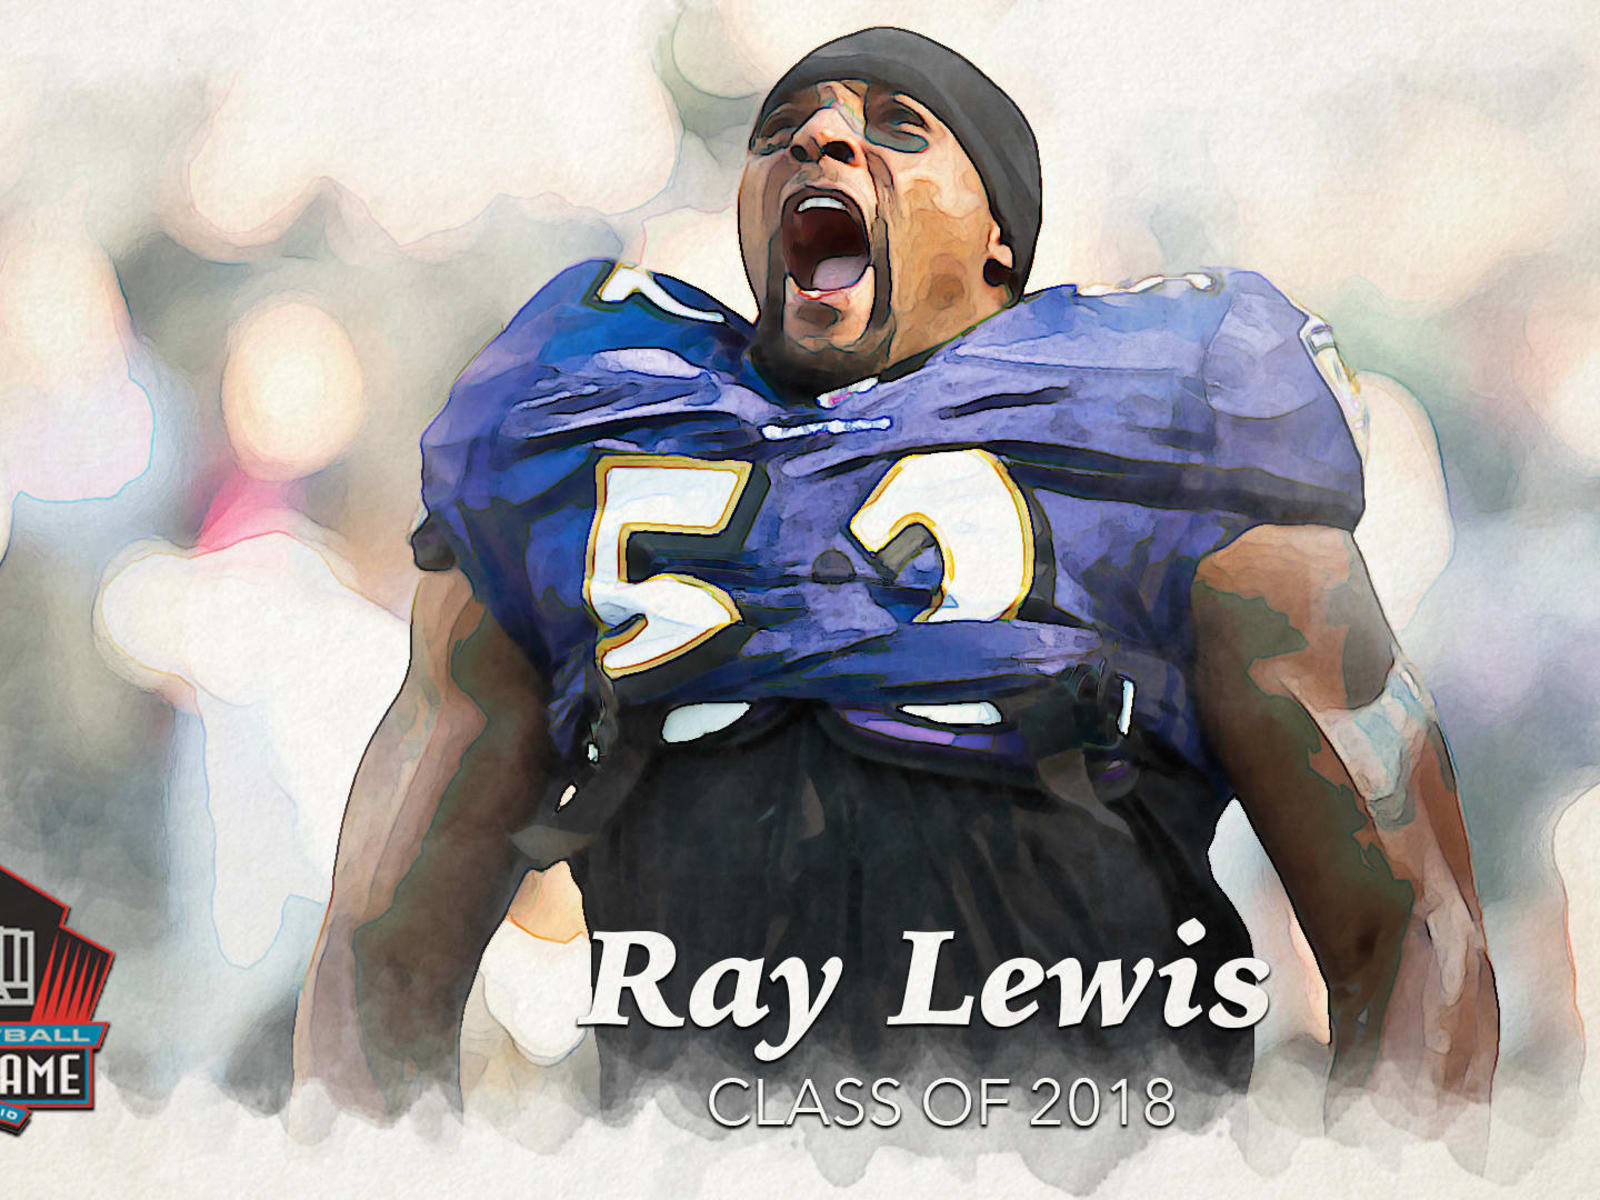 Ray Lewis' final game-worn uniform sent to the Hall of Fame